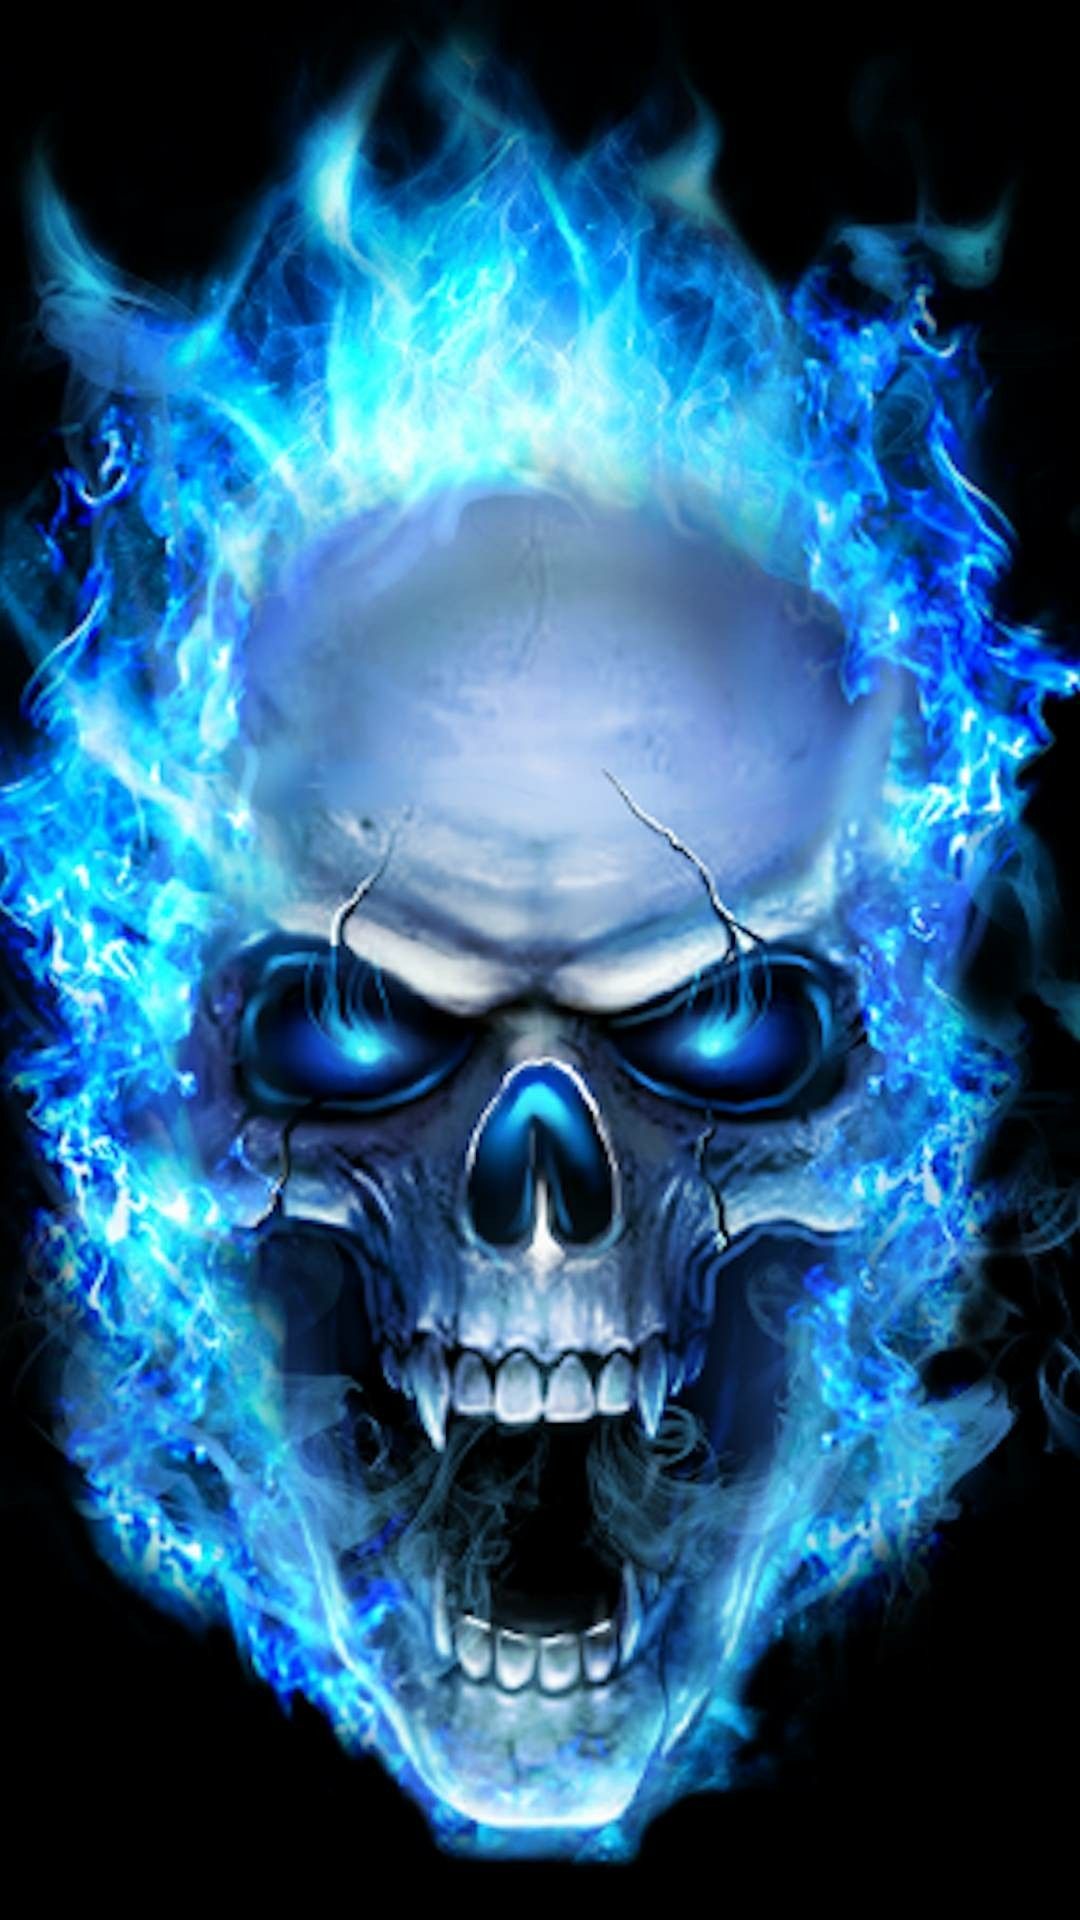 Download Blue Flame Skull In 2019 Blue Fire Skull On Itl Cat